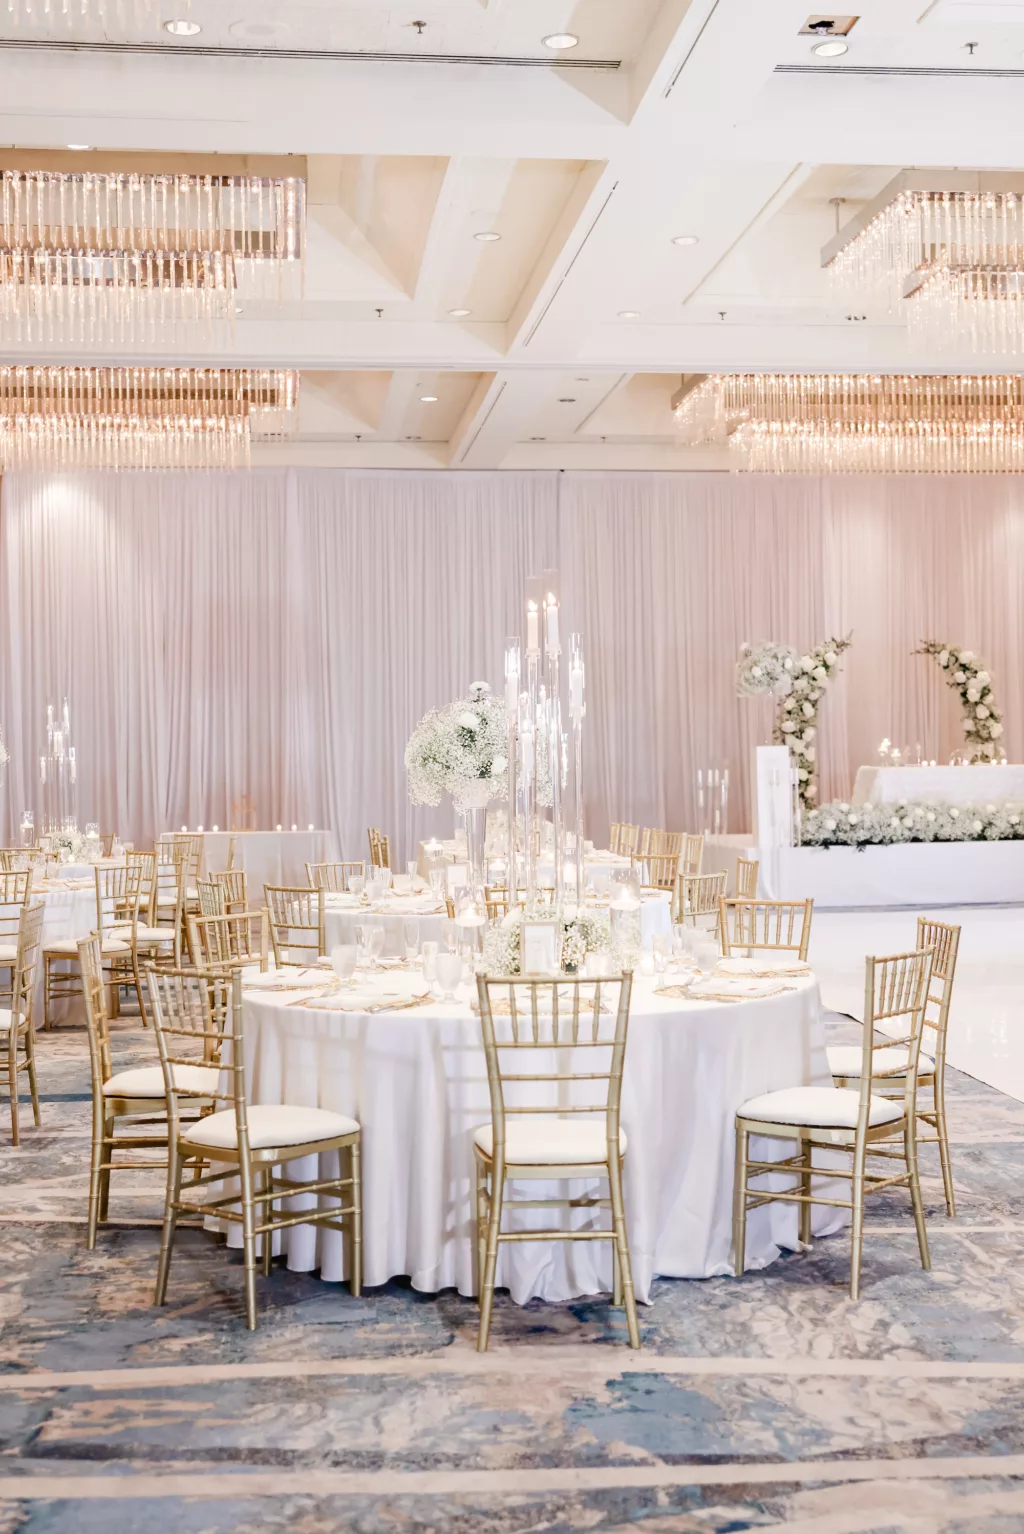 Extravagant Ivory, White, and Gold Wedding Reception Decor Inspiration | Tall Modern Acrylic Candelabra Centerpiece Ideas | Gold Chiavari Chairs | Baby's Breath and White Chrysanthemum Floral Arrangement Centerpieces | Tampa Bay Hotel Venue Hilton Tampa Downtown | Planner Special Moments Event Planning